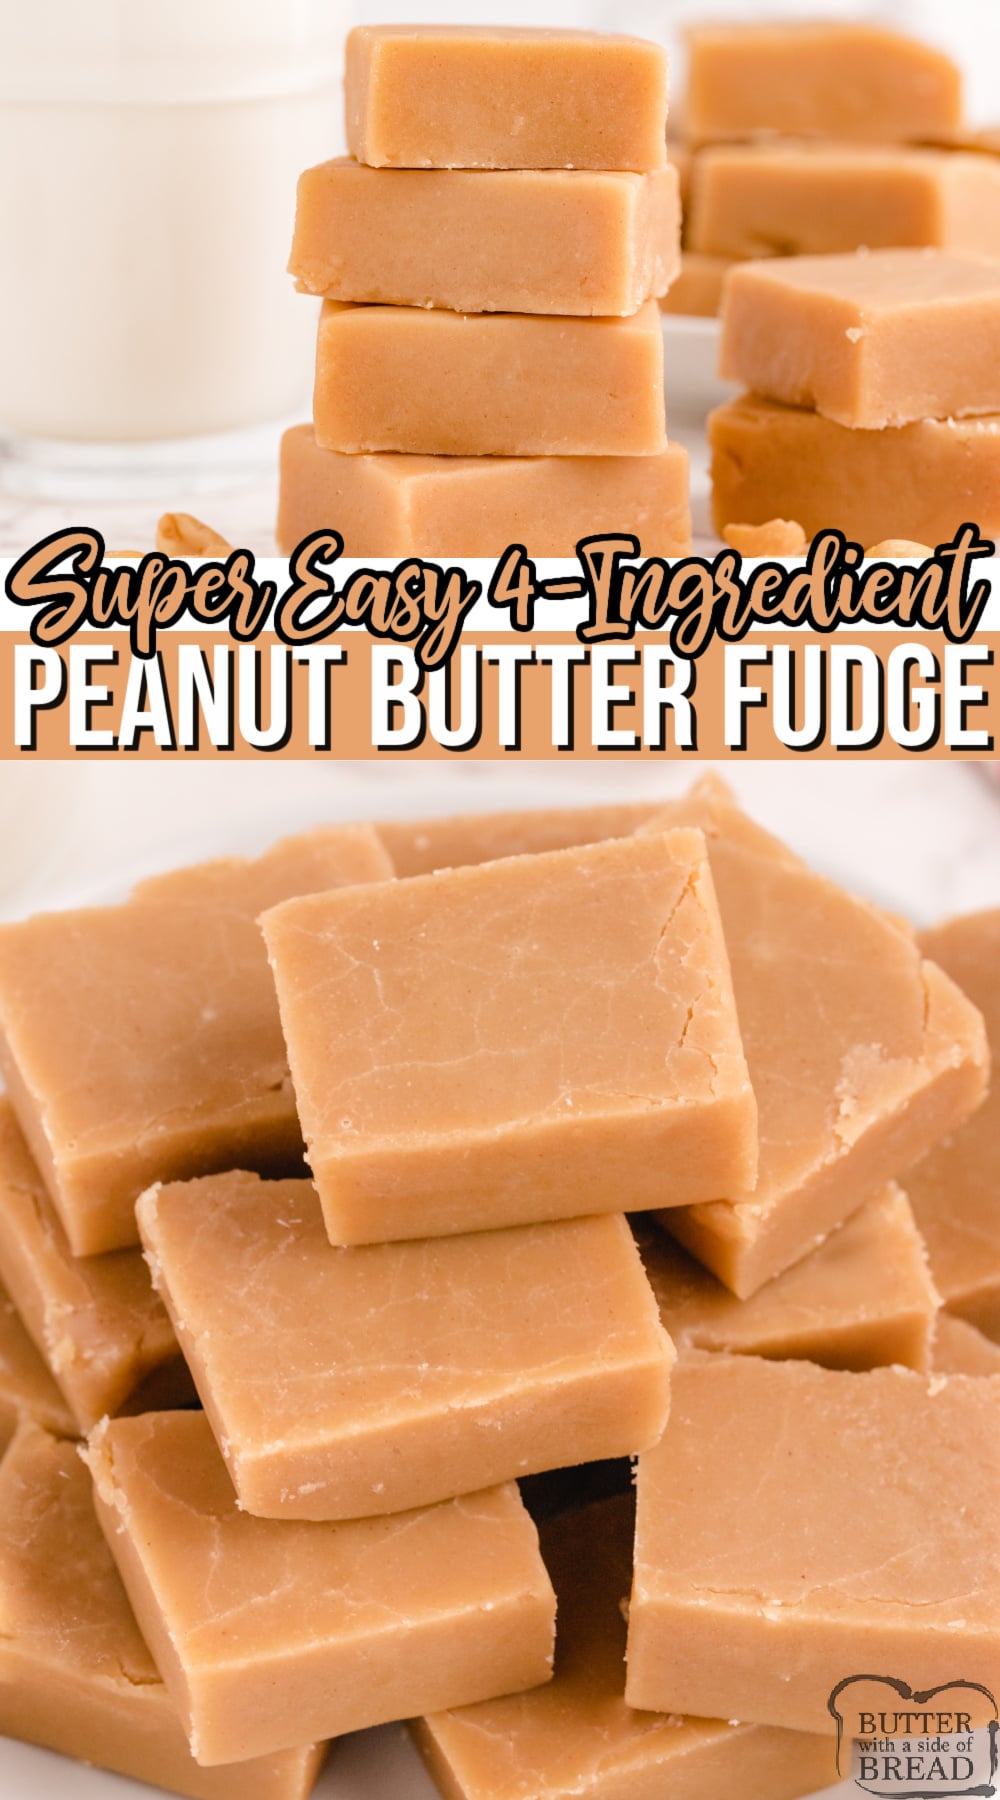 Peanut Butter Fudge is made easily with only 4 simple ingredients, no candy thermometer needed! This easy fudge recipe is made with delicious and simple ingredient you can find in your pantry: peanut butter, sugar, milk and vanilla extract- that's it!